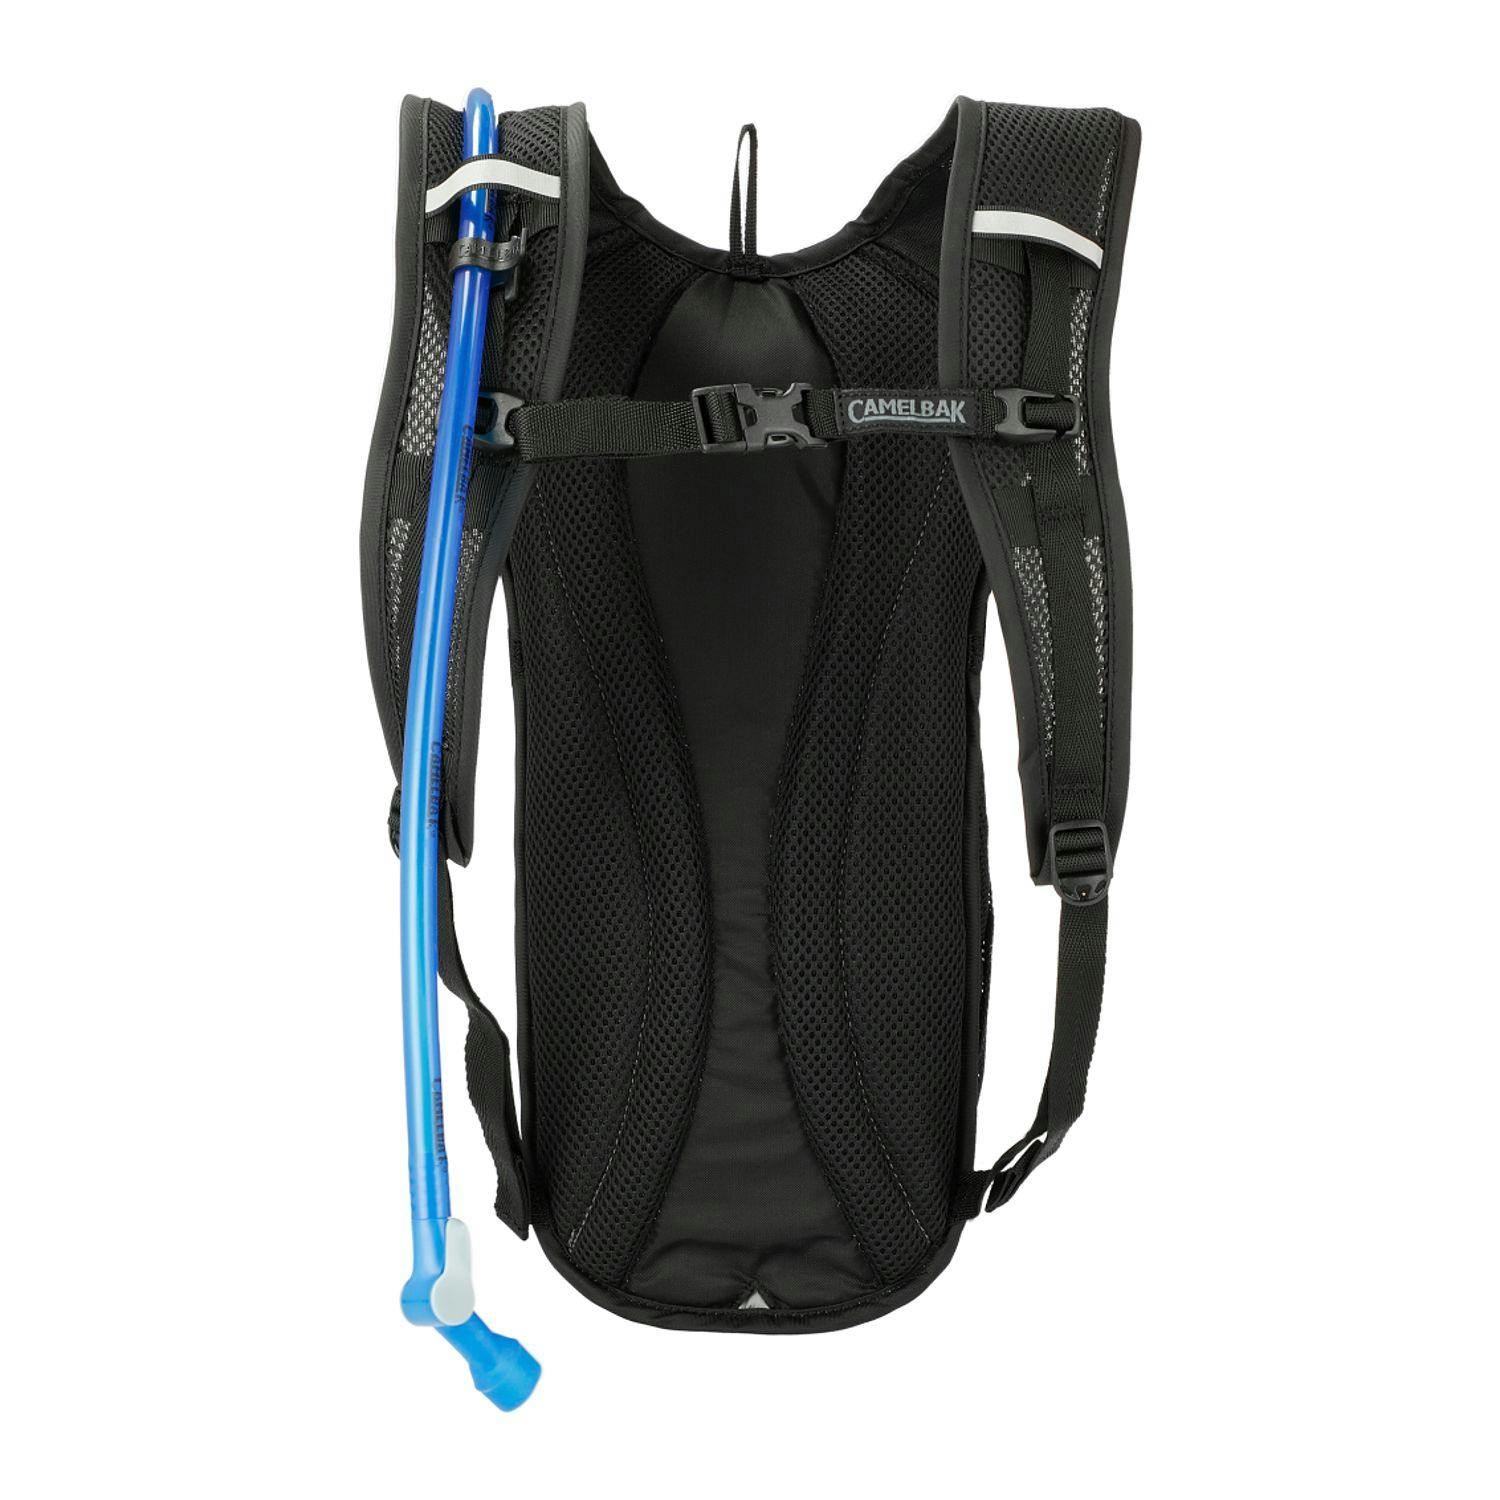 Camelbak Eco-Rogue Hydration Pack - additional Image 1